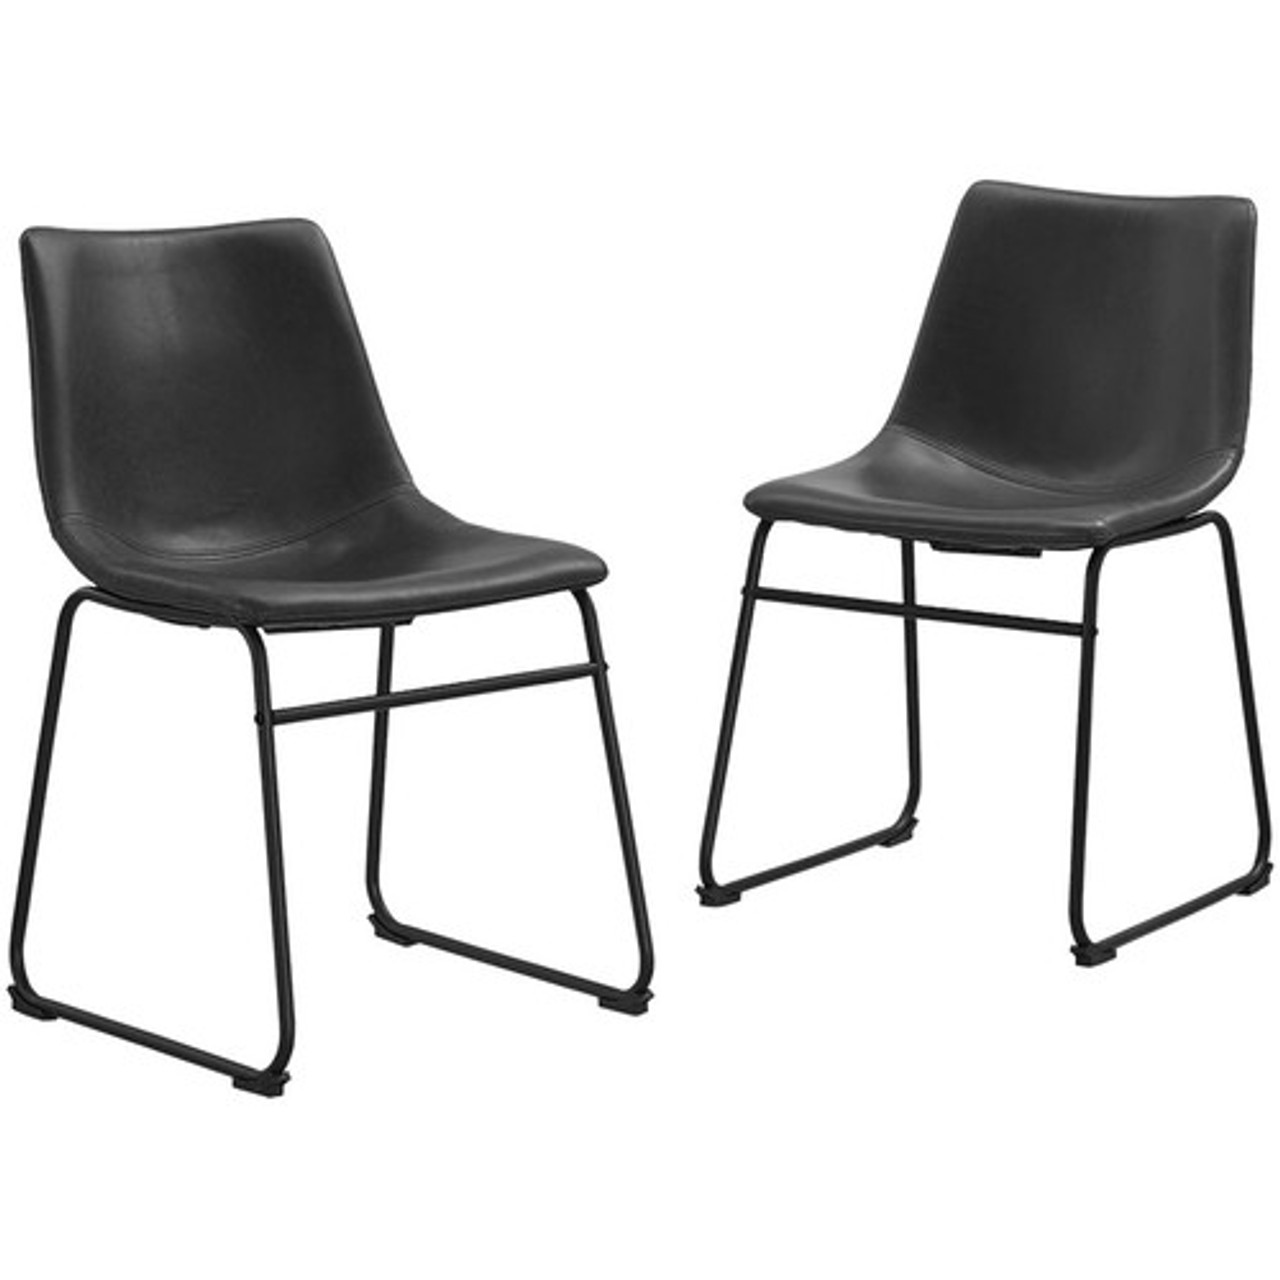 Walker Edison - Industrial Faux Leather Dining Chairs (Set of 2) - Black